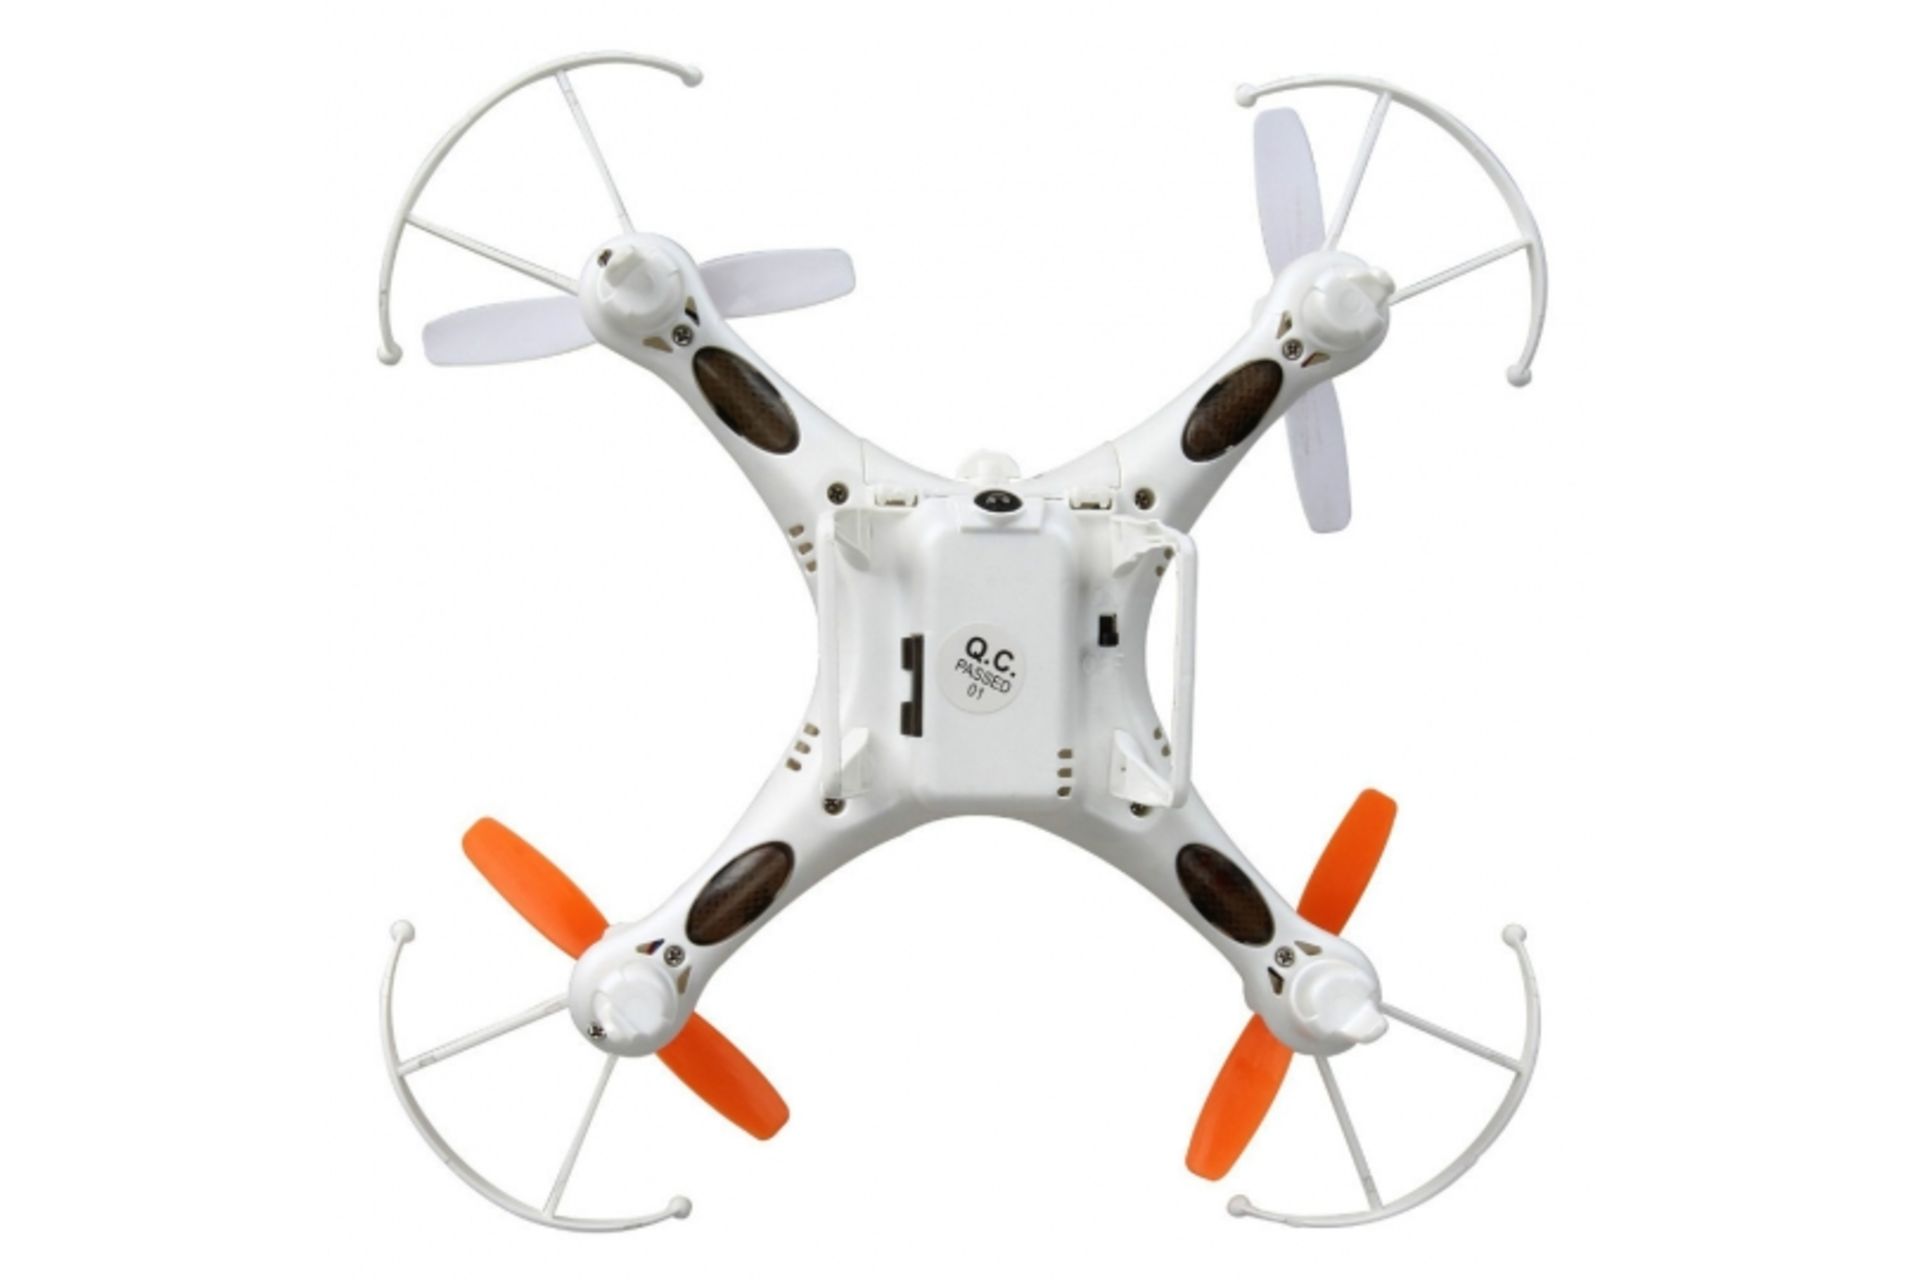 SKYTEC RC QUADCOPTER 4 CHANNEL 6 AXIS 2.4Ghz BNIB - Image 14 of 14